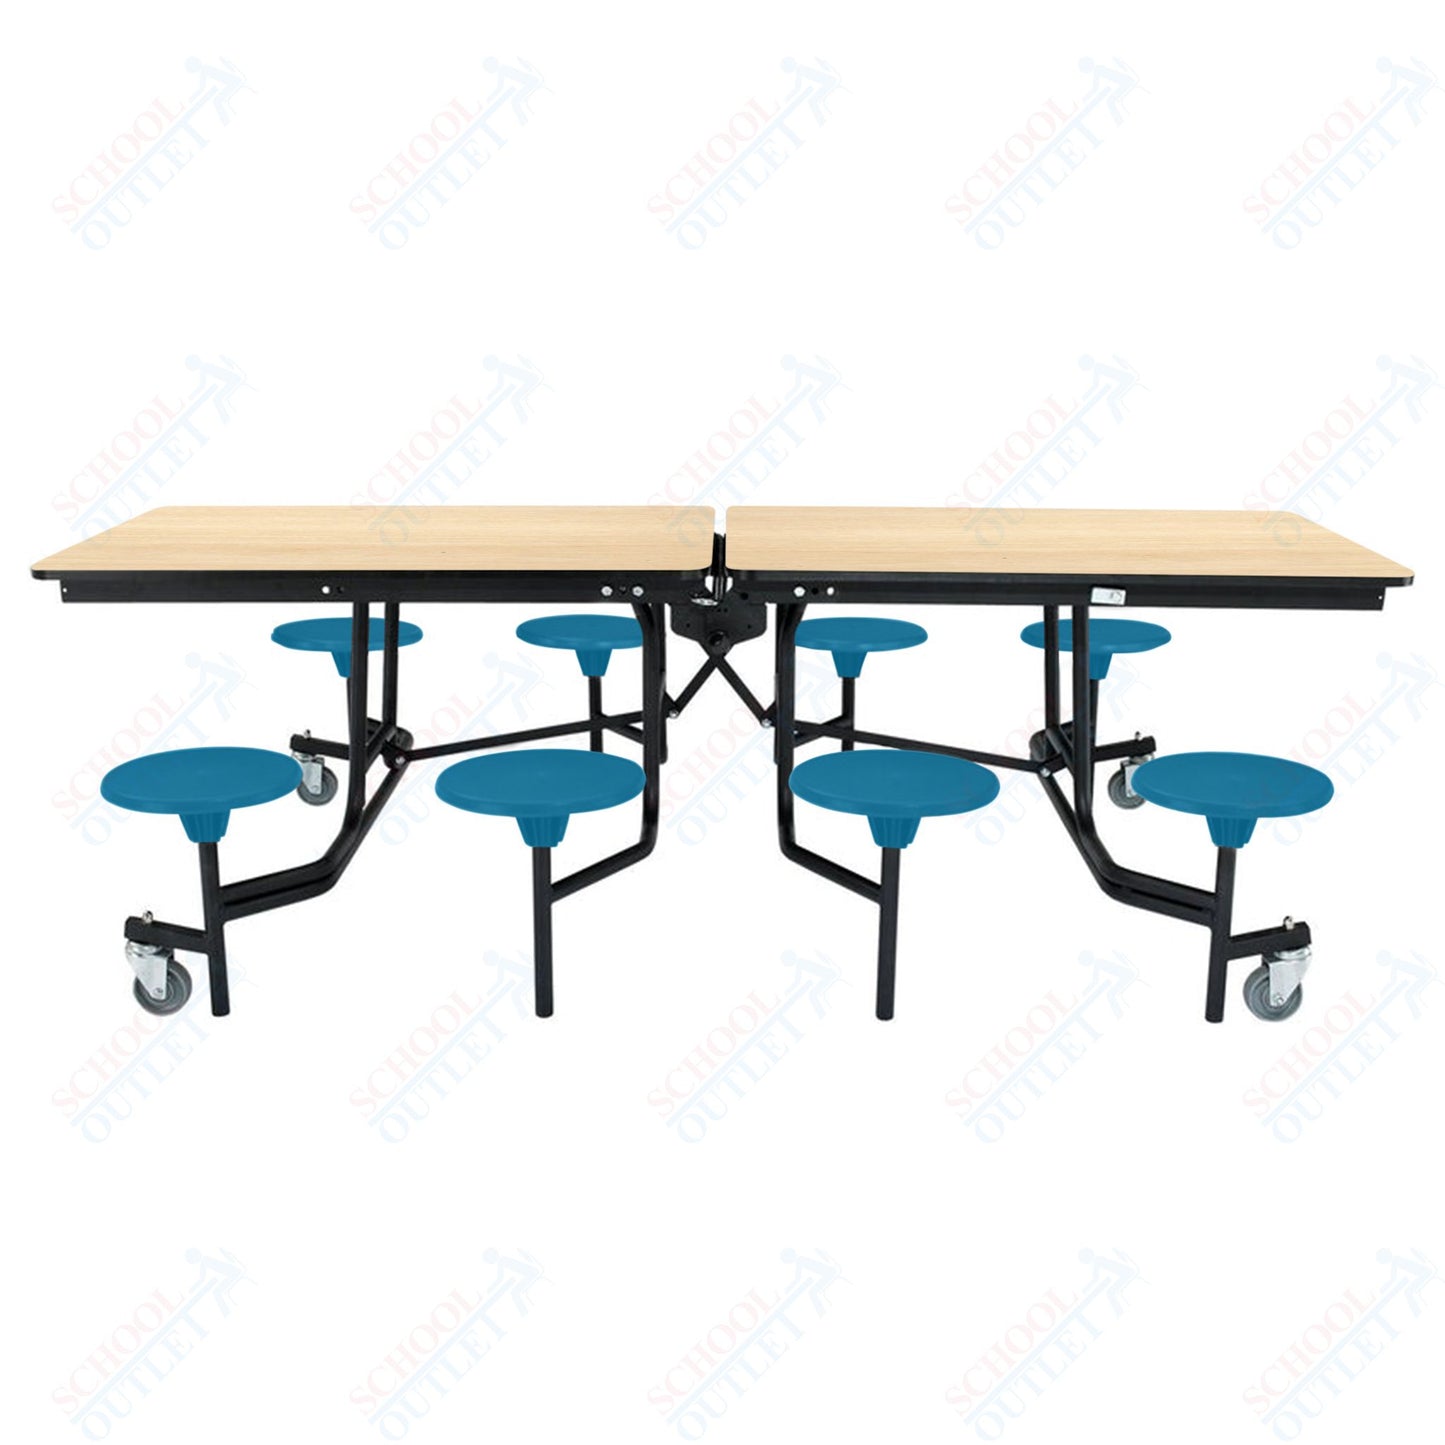 NPS Mobile Cafeteria Table - 30" W x 8' L - 8 Stools - Plywood Core - Protect Edge - Chrome Frame